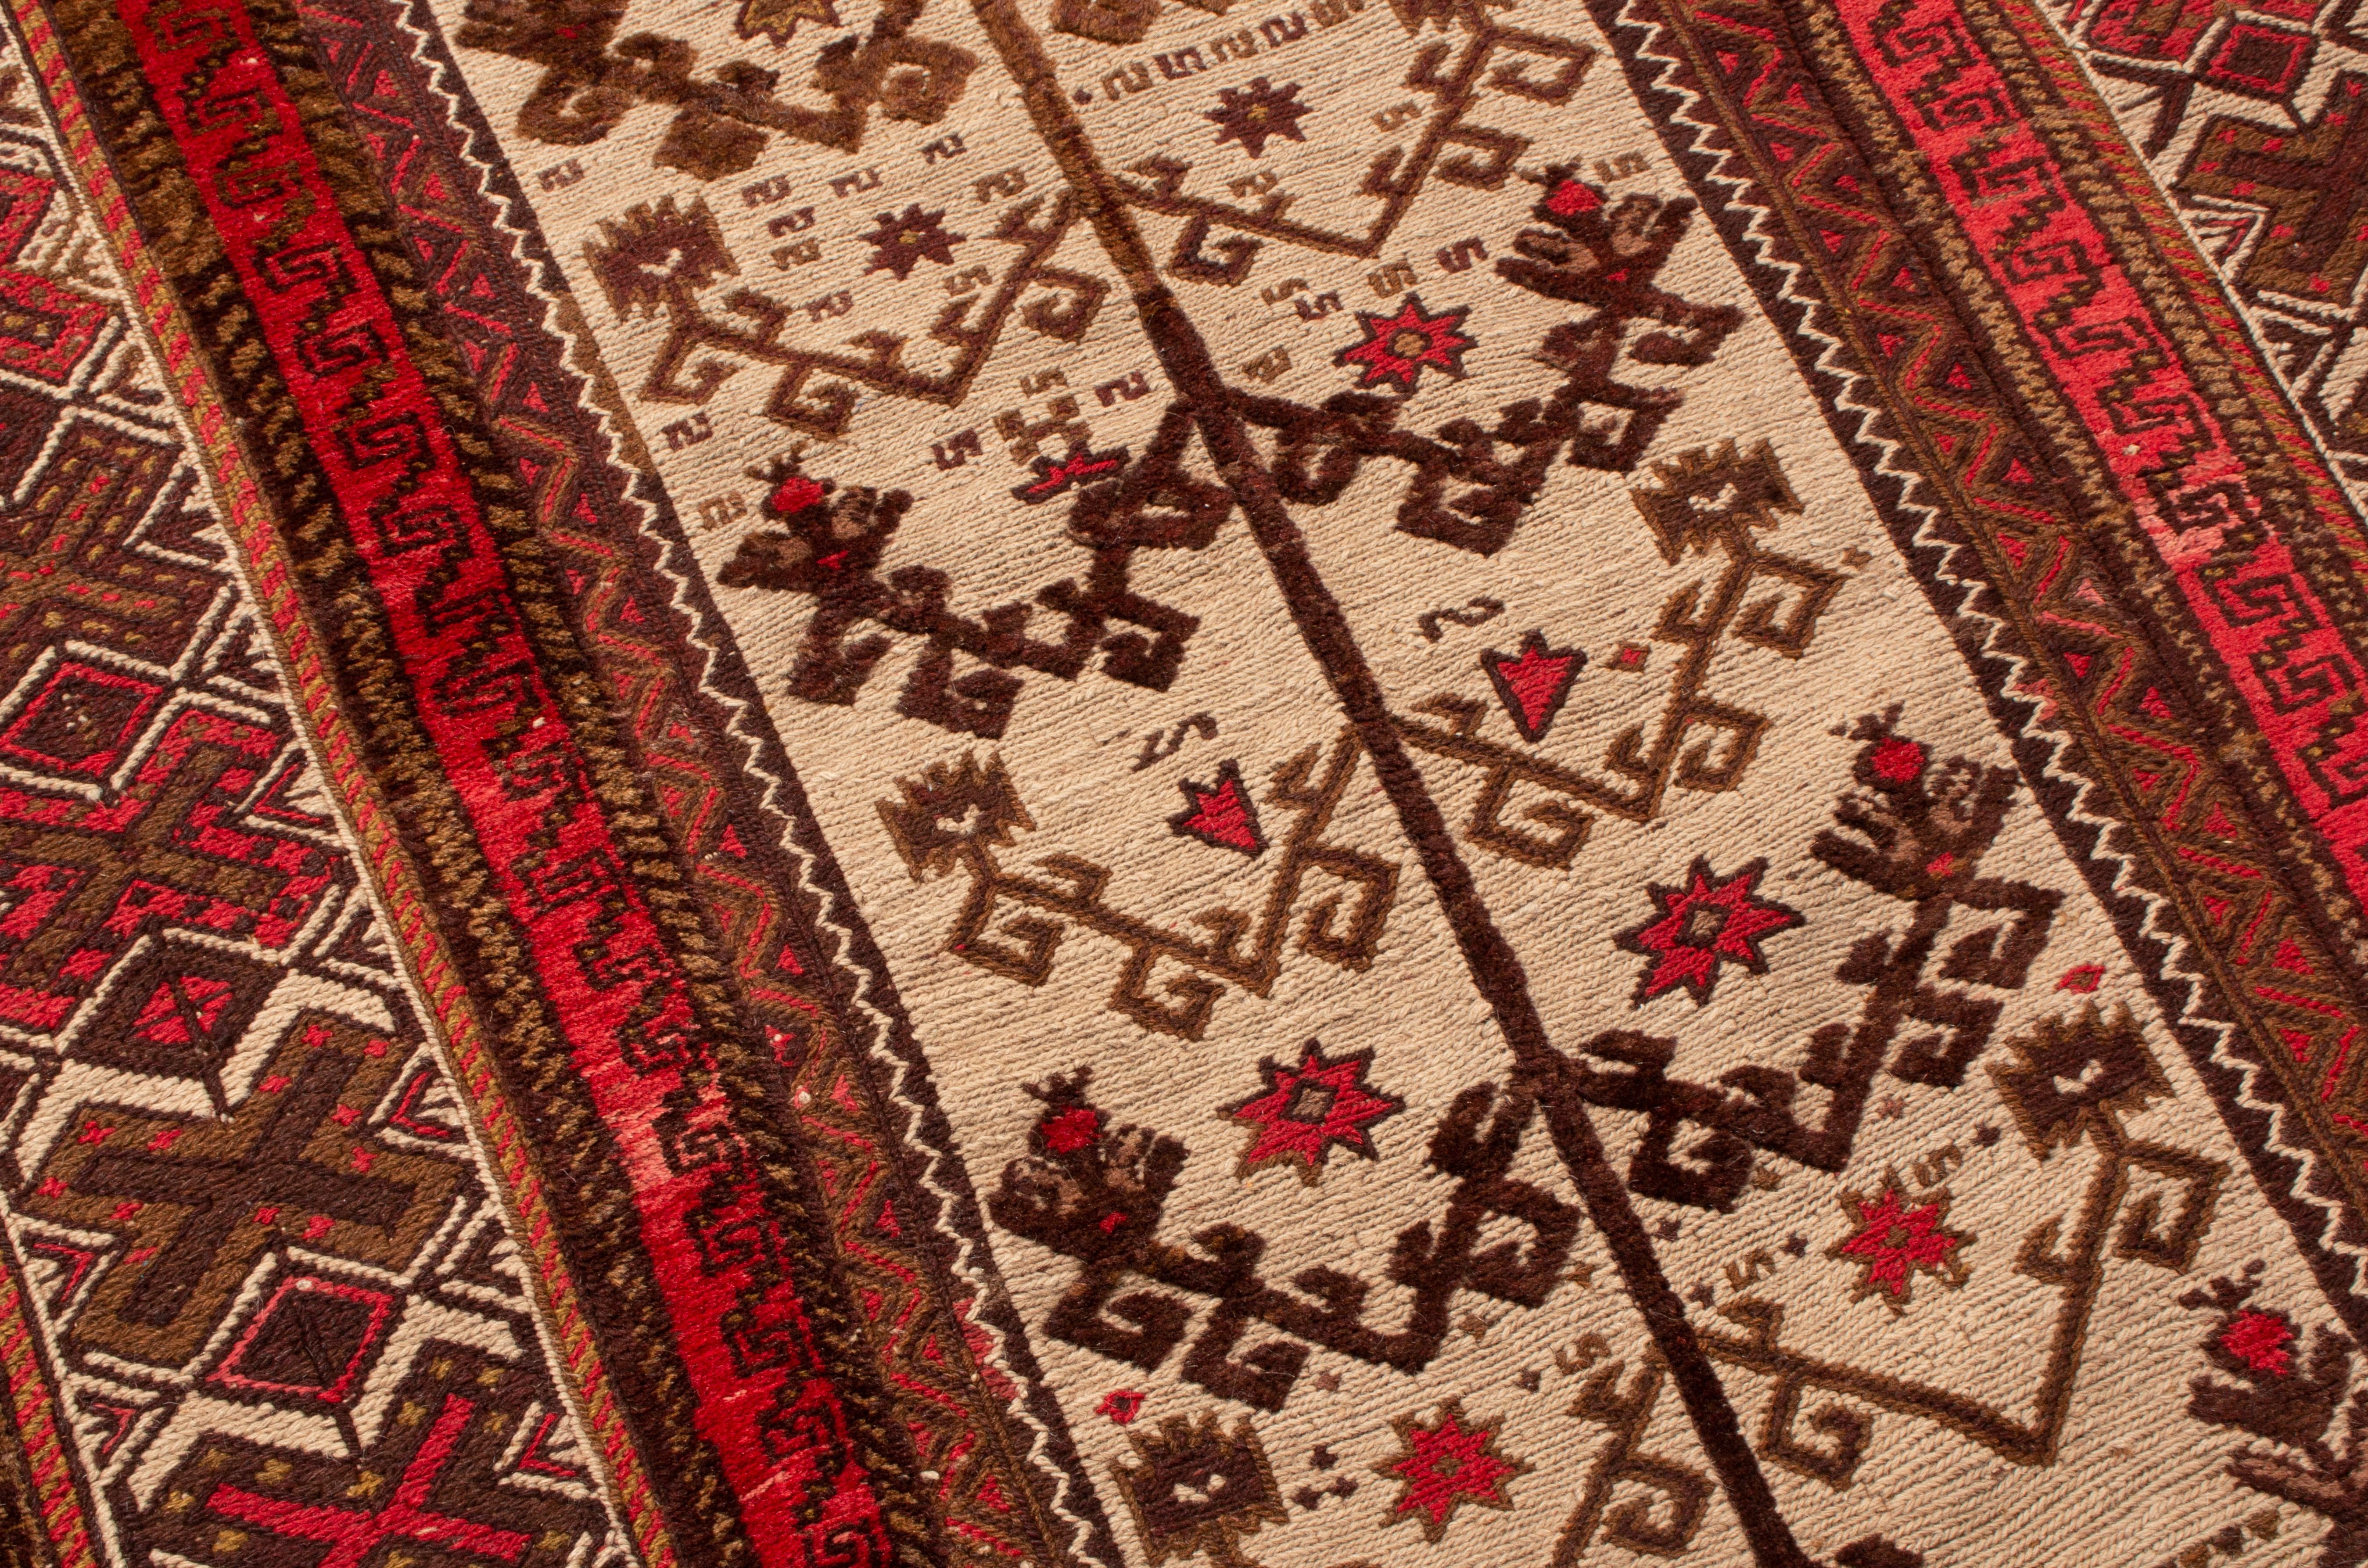 Vintage Afghan Transitional Red and Beige Wool Kilim Rug by Rug & Kilim In Good Condition For Sale In Long Island City, NY